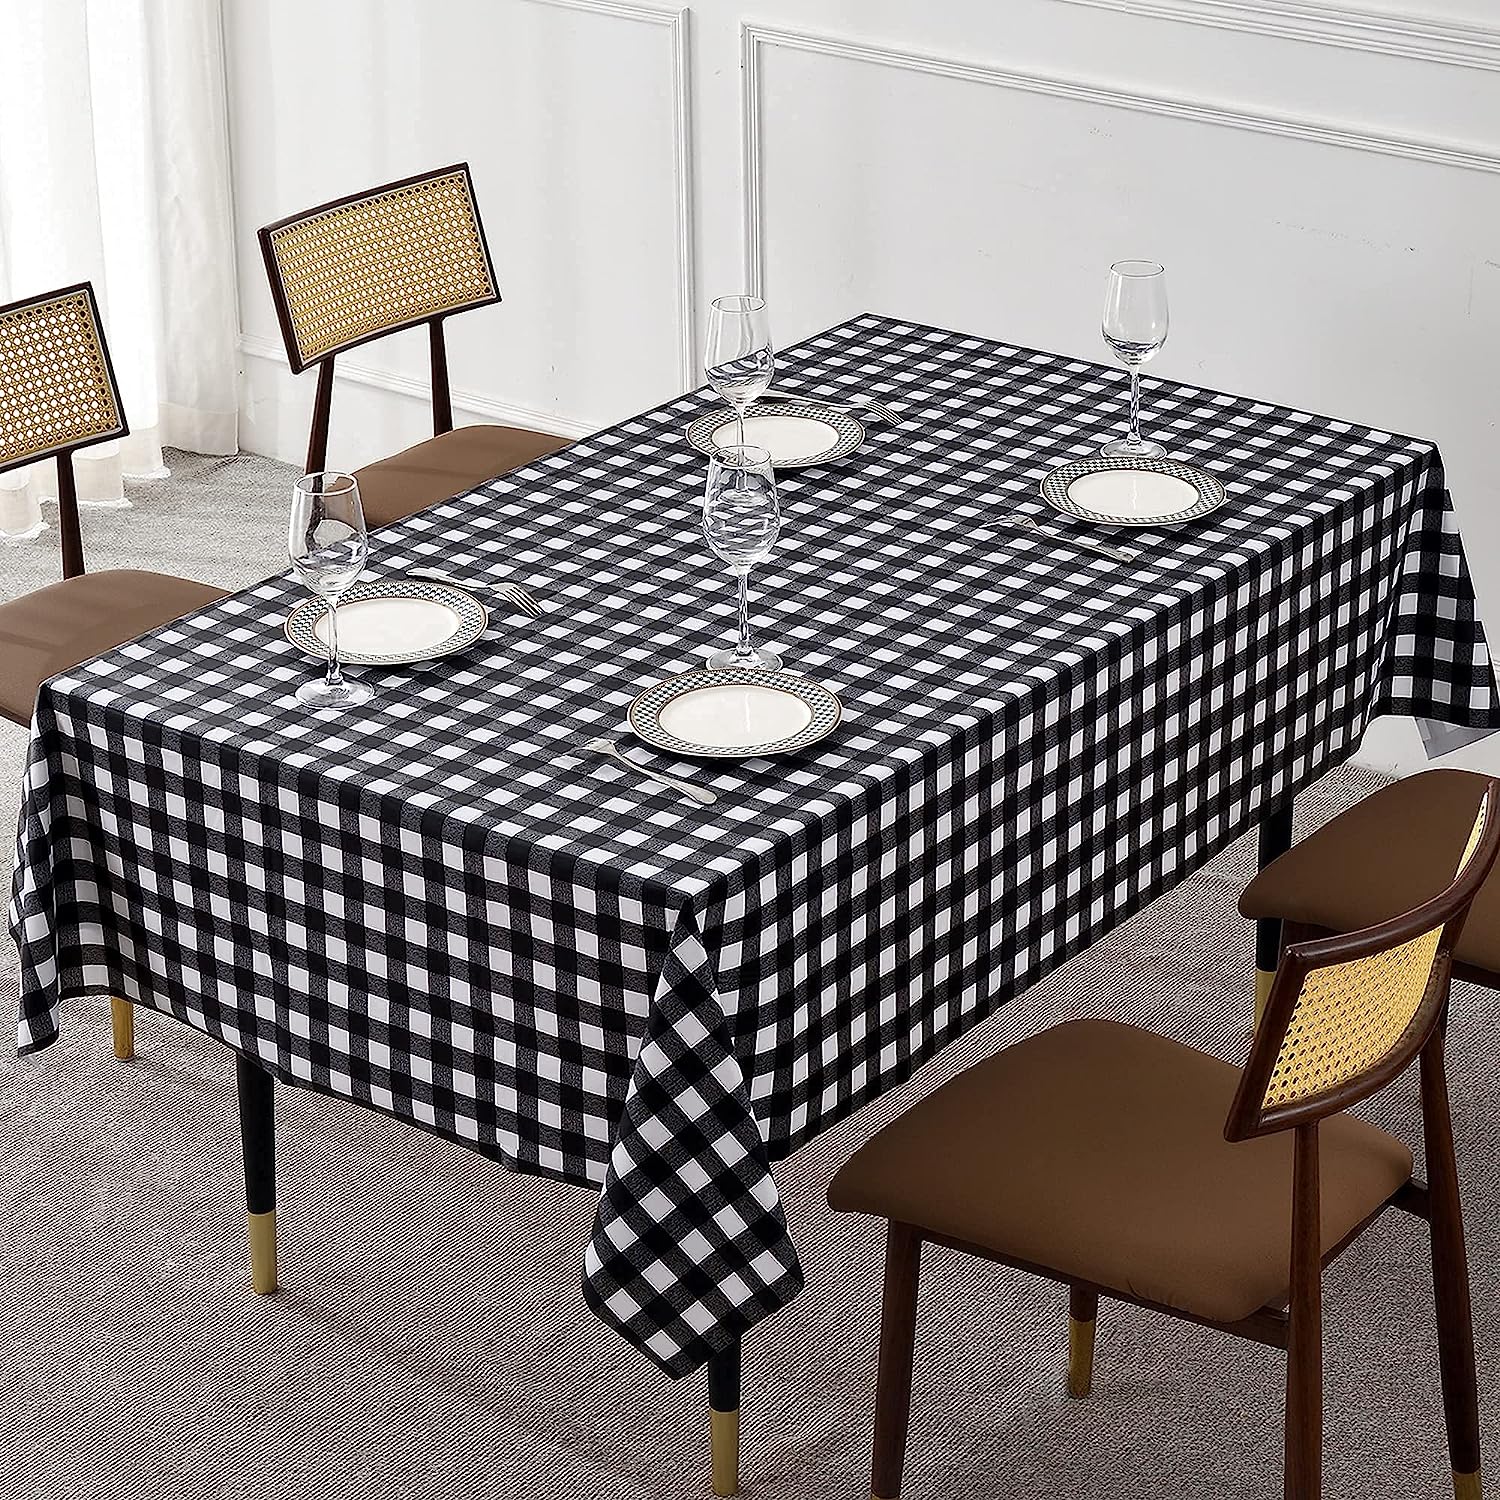 Enhancing Al Fresco Dining The Magic Of Outdoor Tablecloths, improving openair dining experience, outdoor table linen